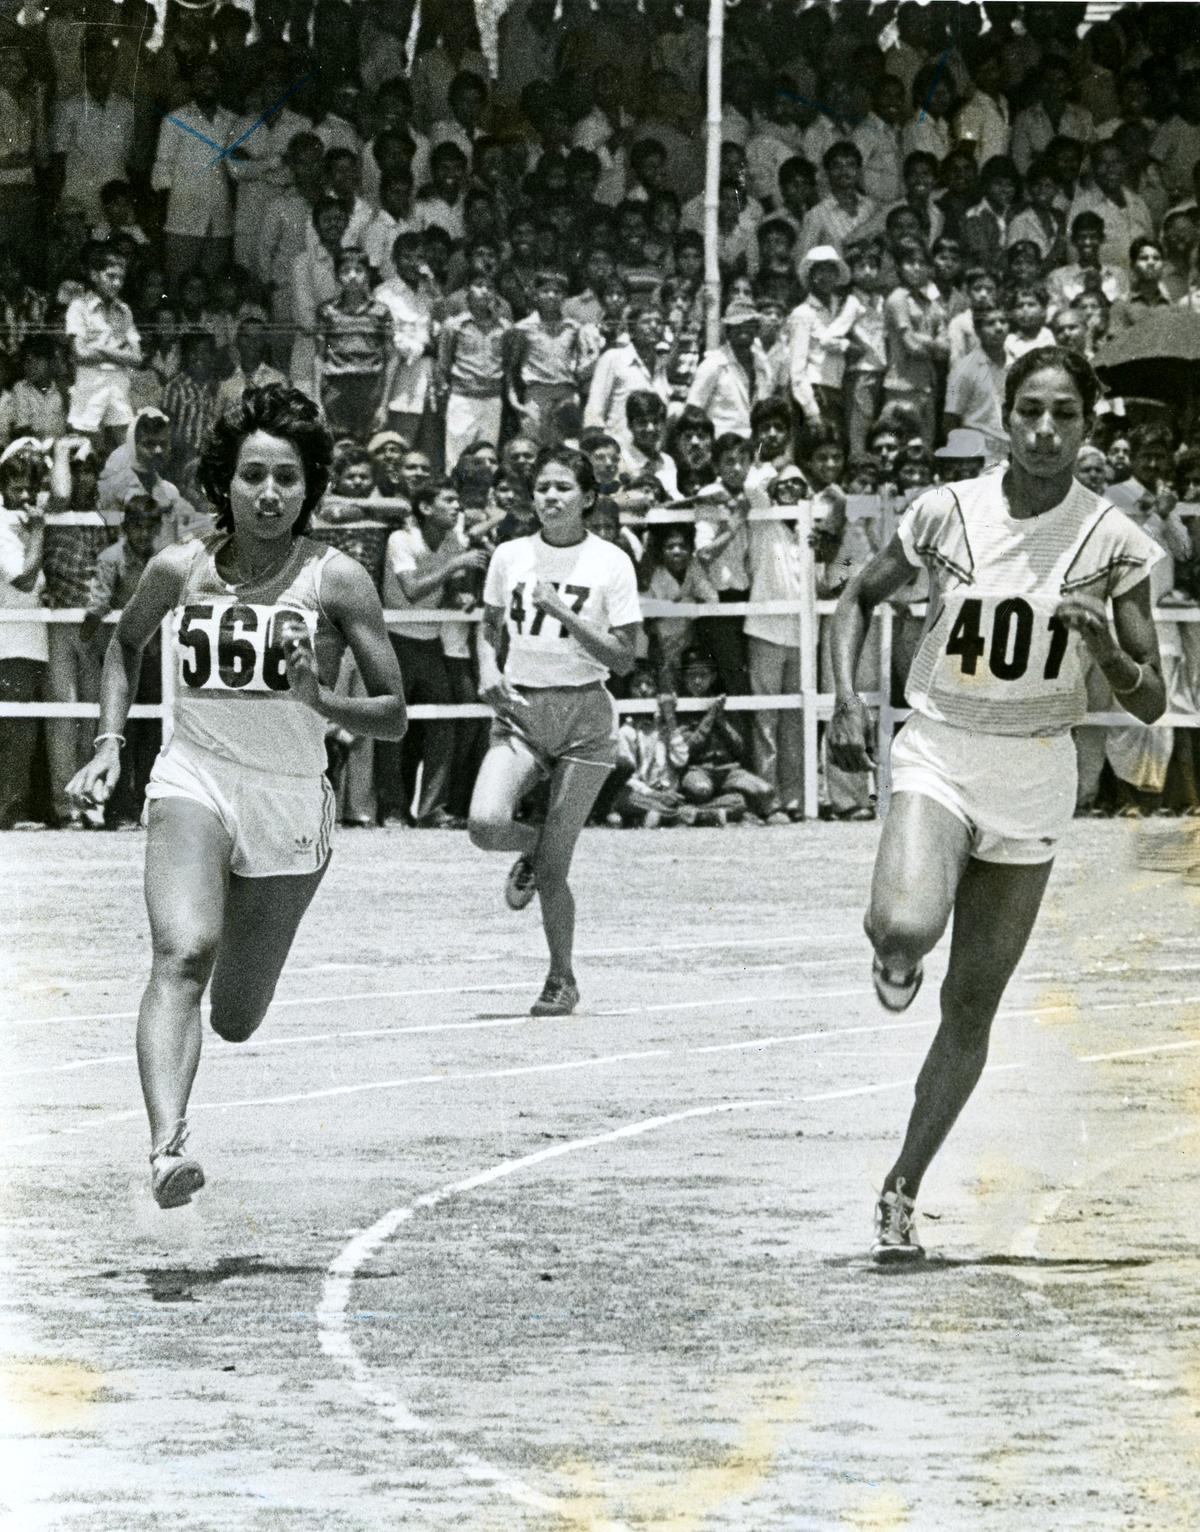 Top talent: Ashwini, left, is one of those rare athletes who has beaten the legendary PT Usha, right, at a young age.  |  Photo credit: The Hindu Archives